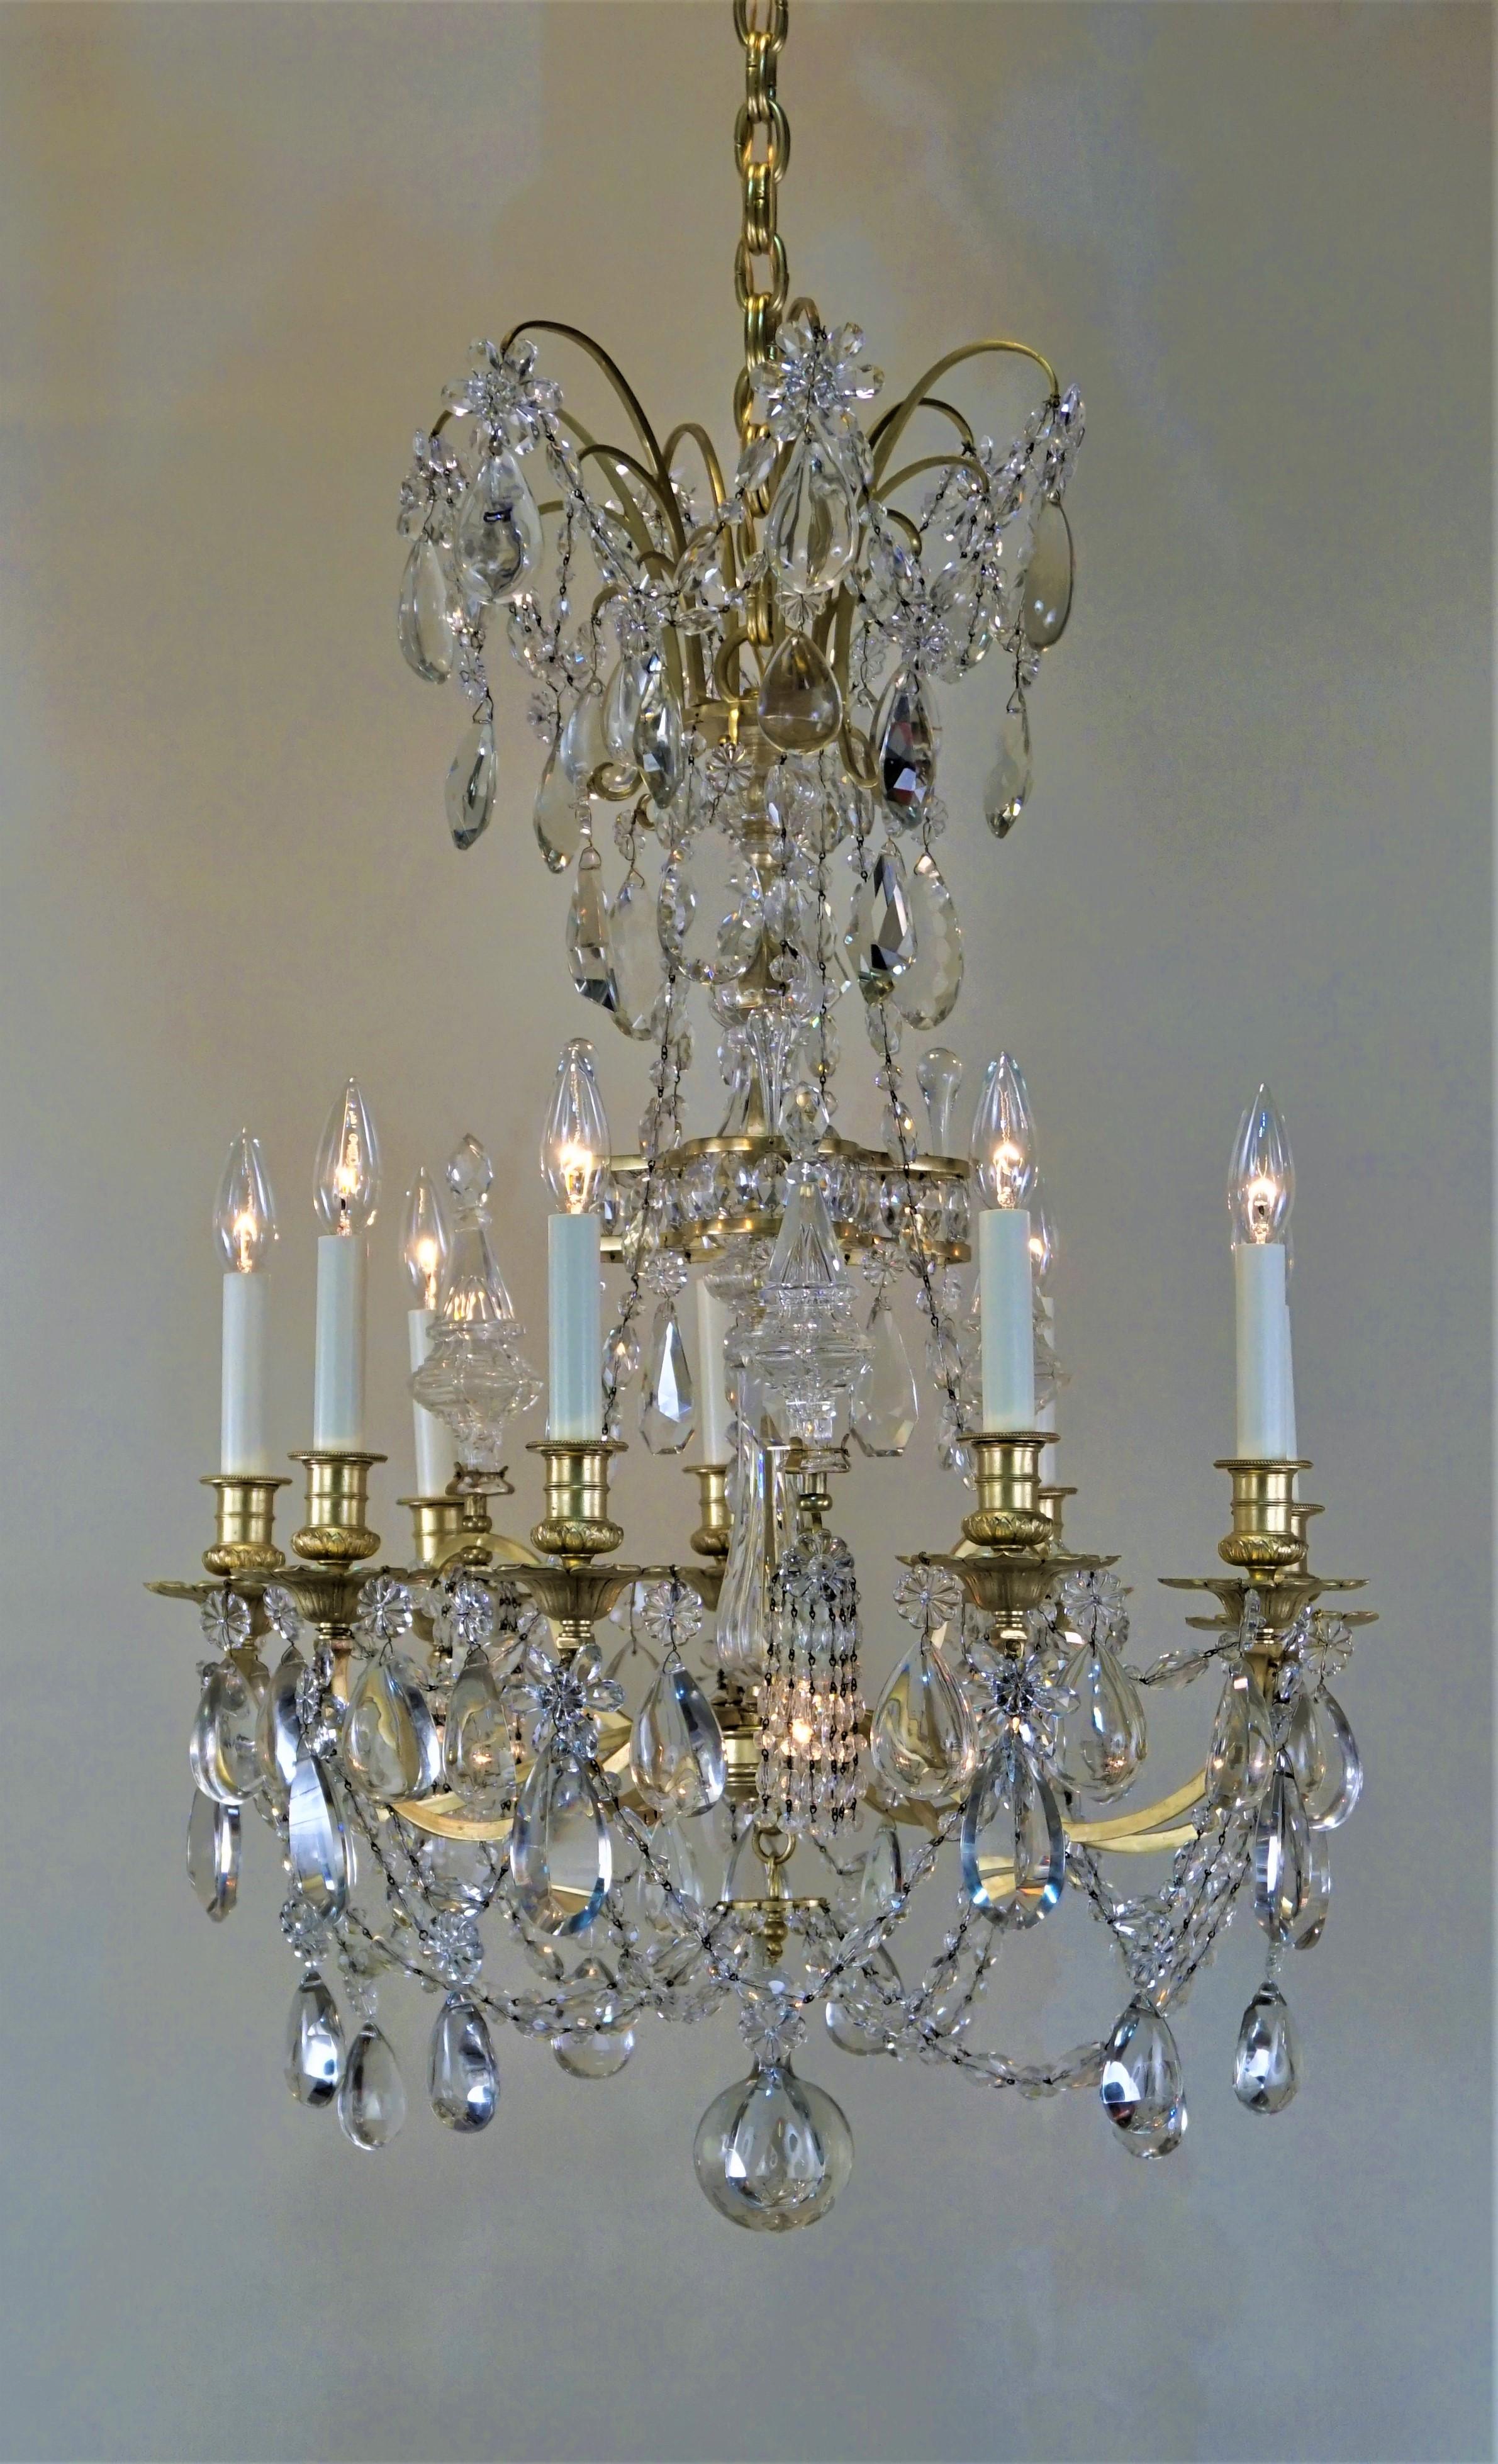 Maison Baguès high quality cut crystal and beautiful design bronze frame with fifteen-light chandelier.
Minimum height fully installed is 39